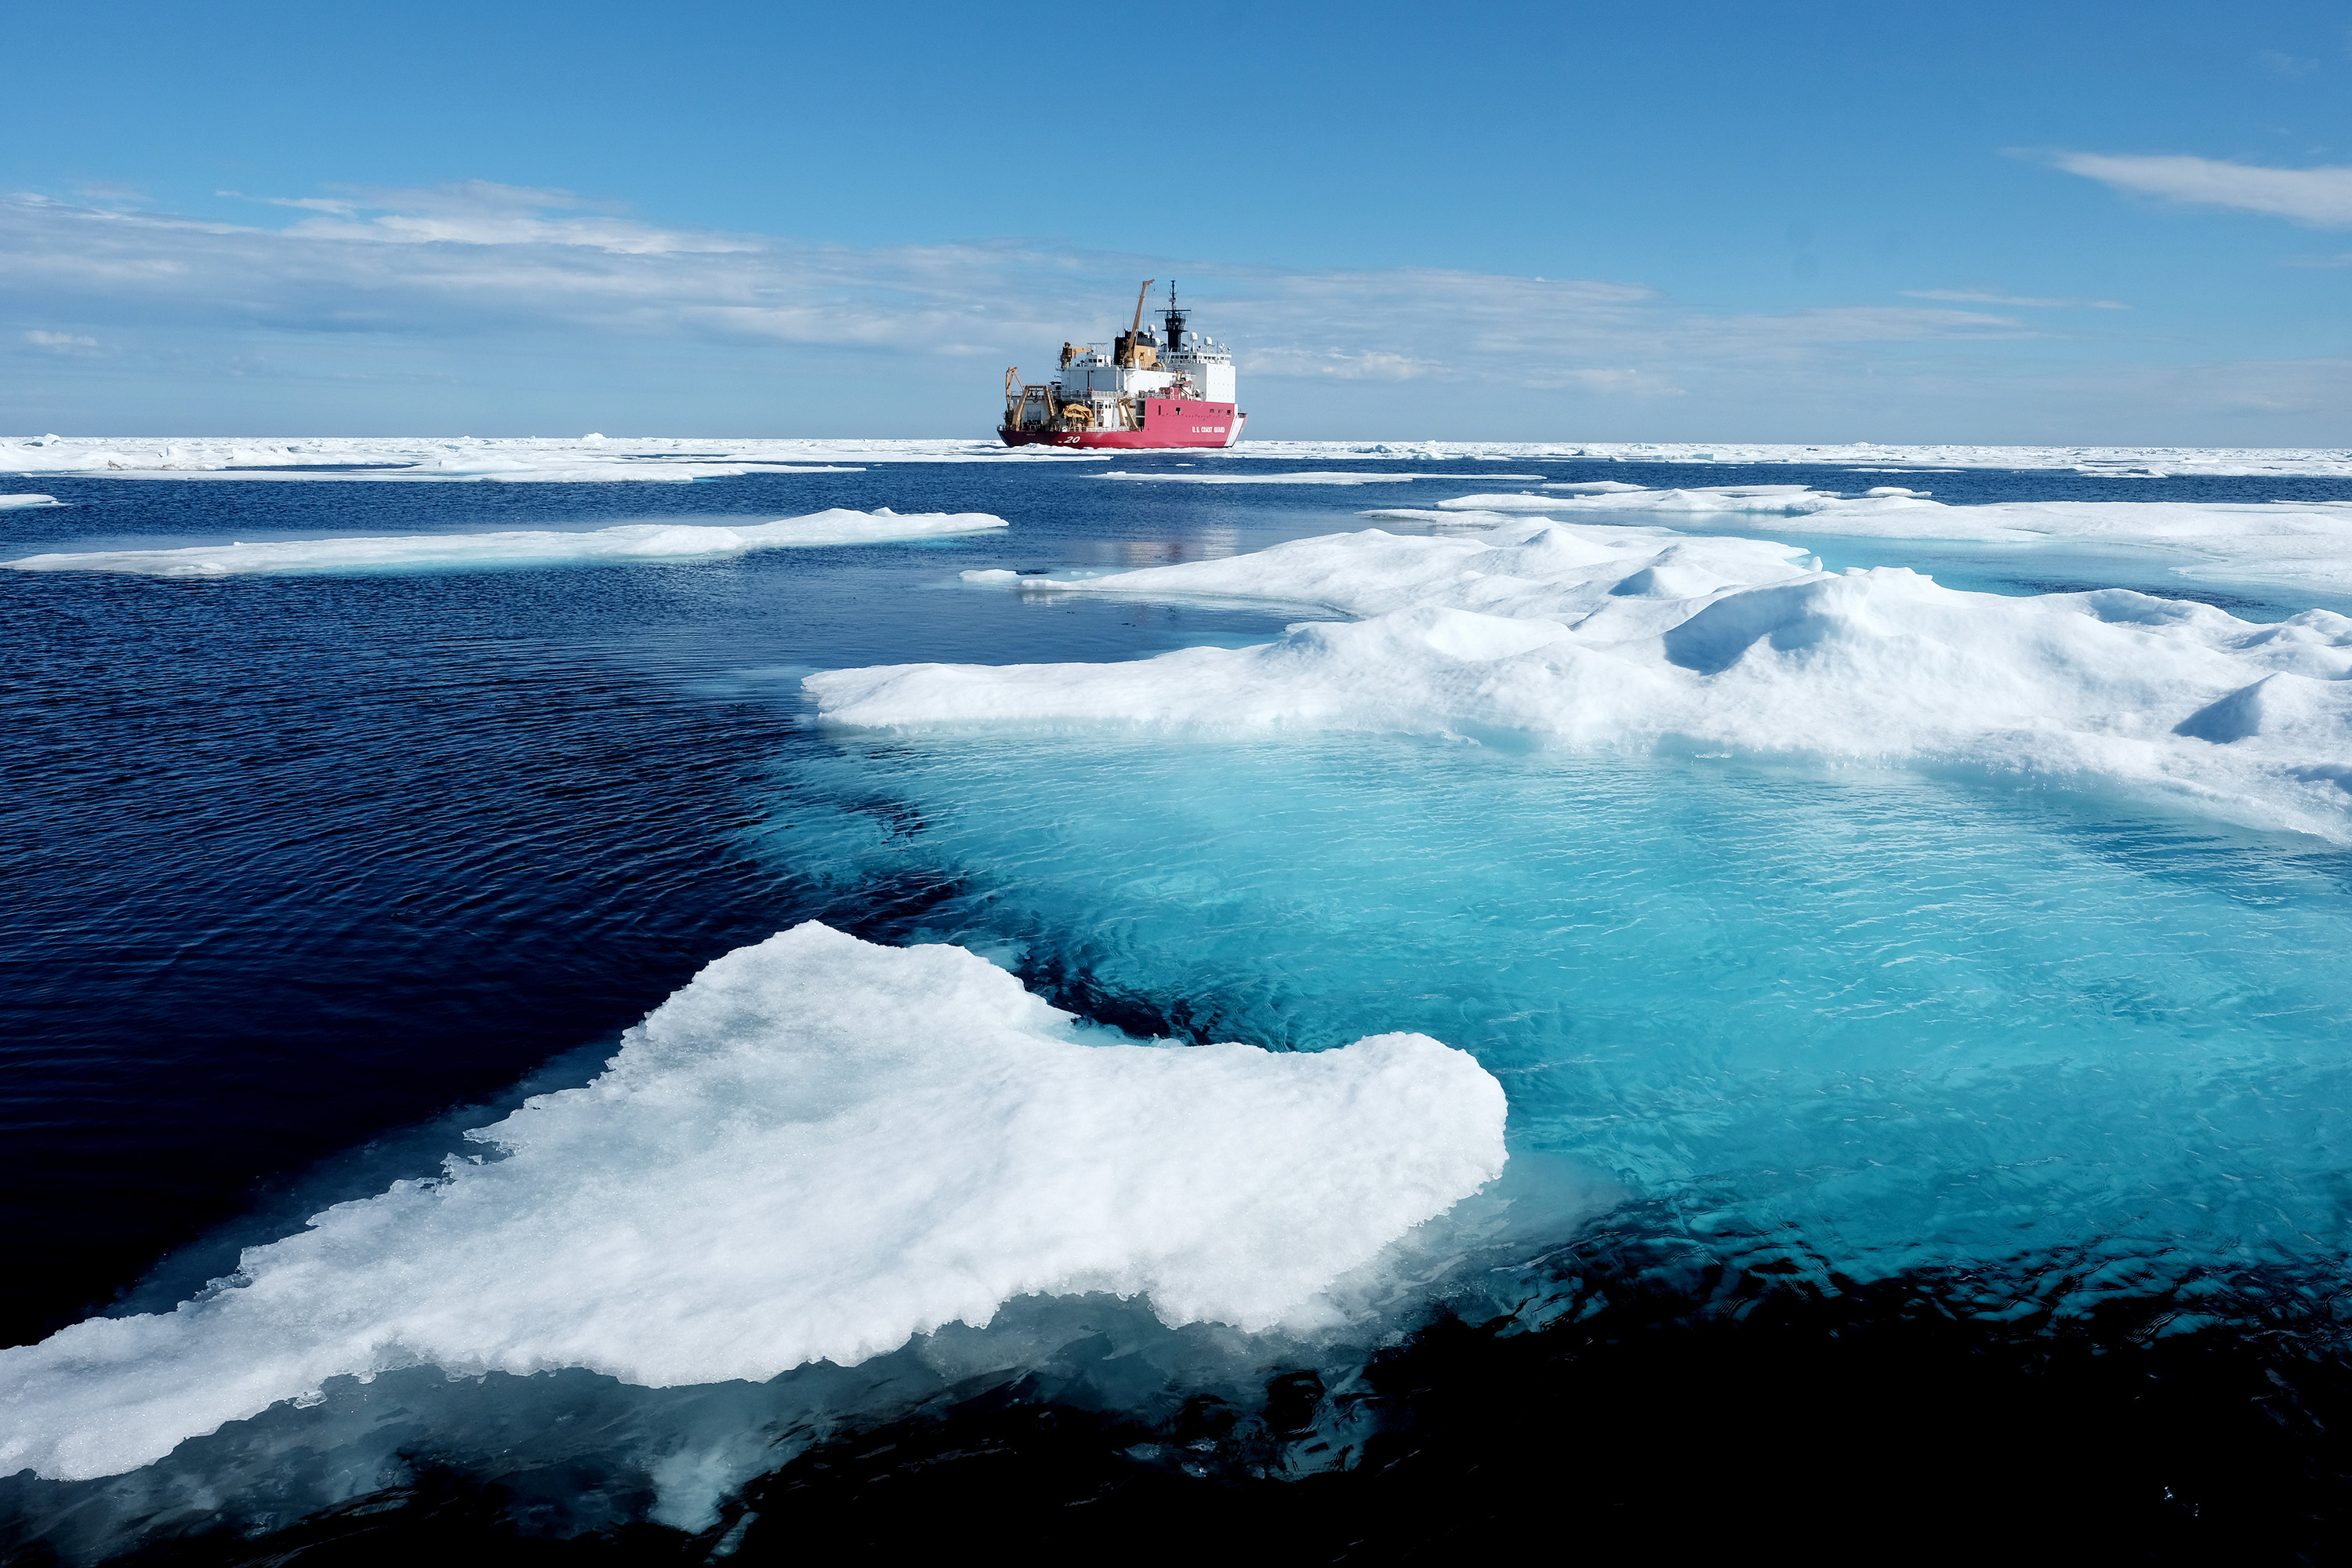 Ice floes surround the U.S. Coast Guard Cutter Healy in the Arctic Ocean on July 29. (Bonnie Jo Mount / The Washington Post)